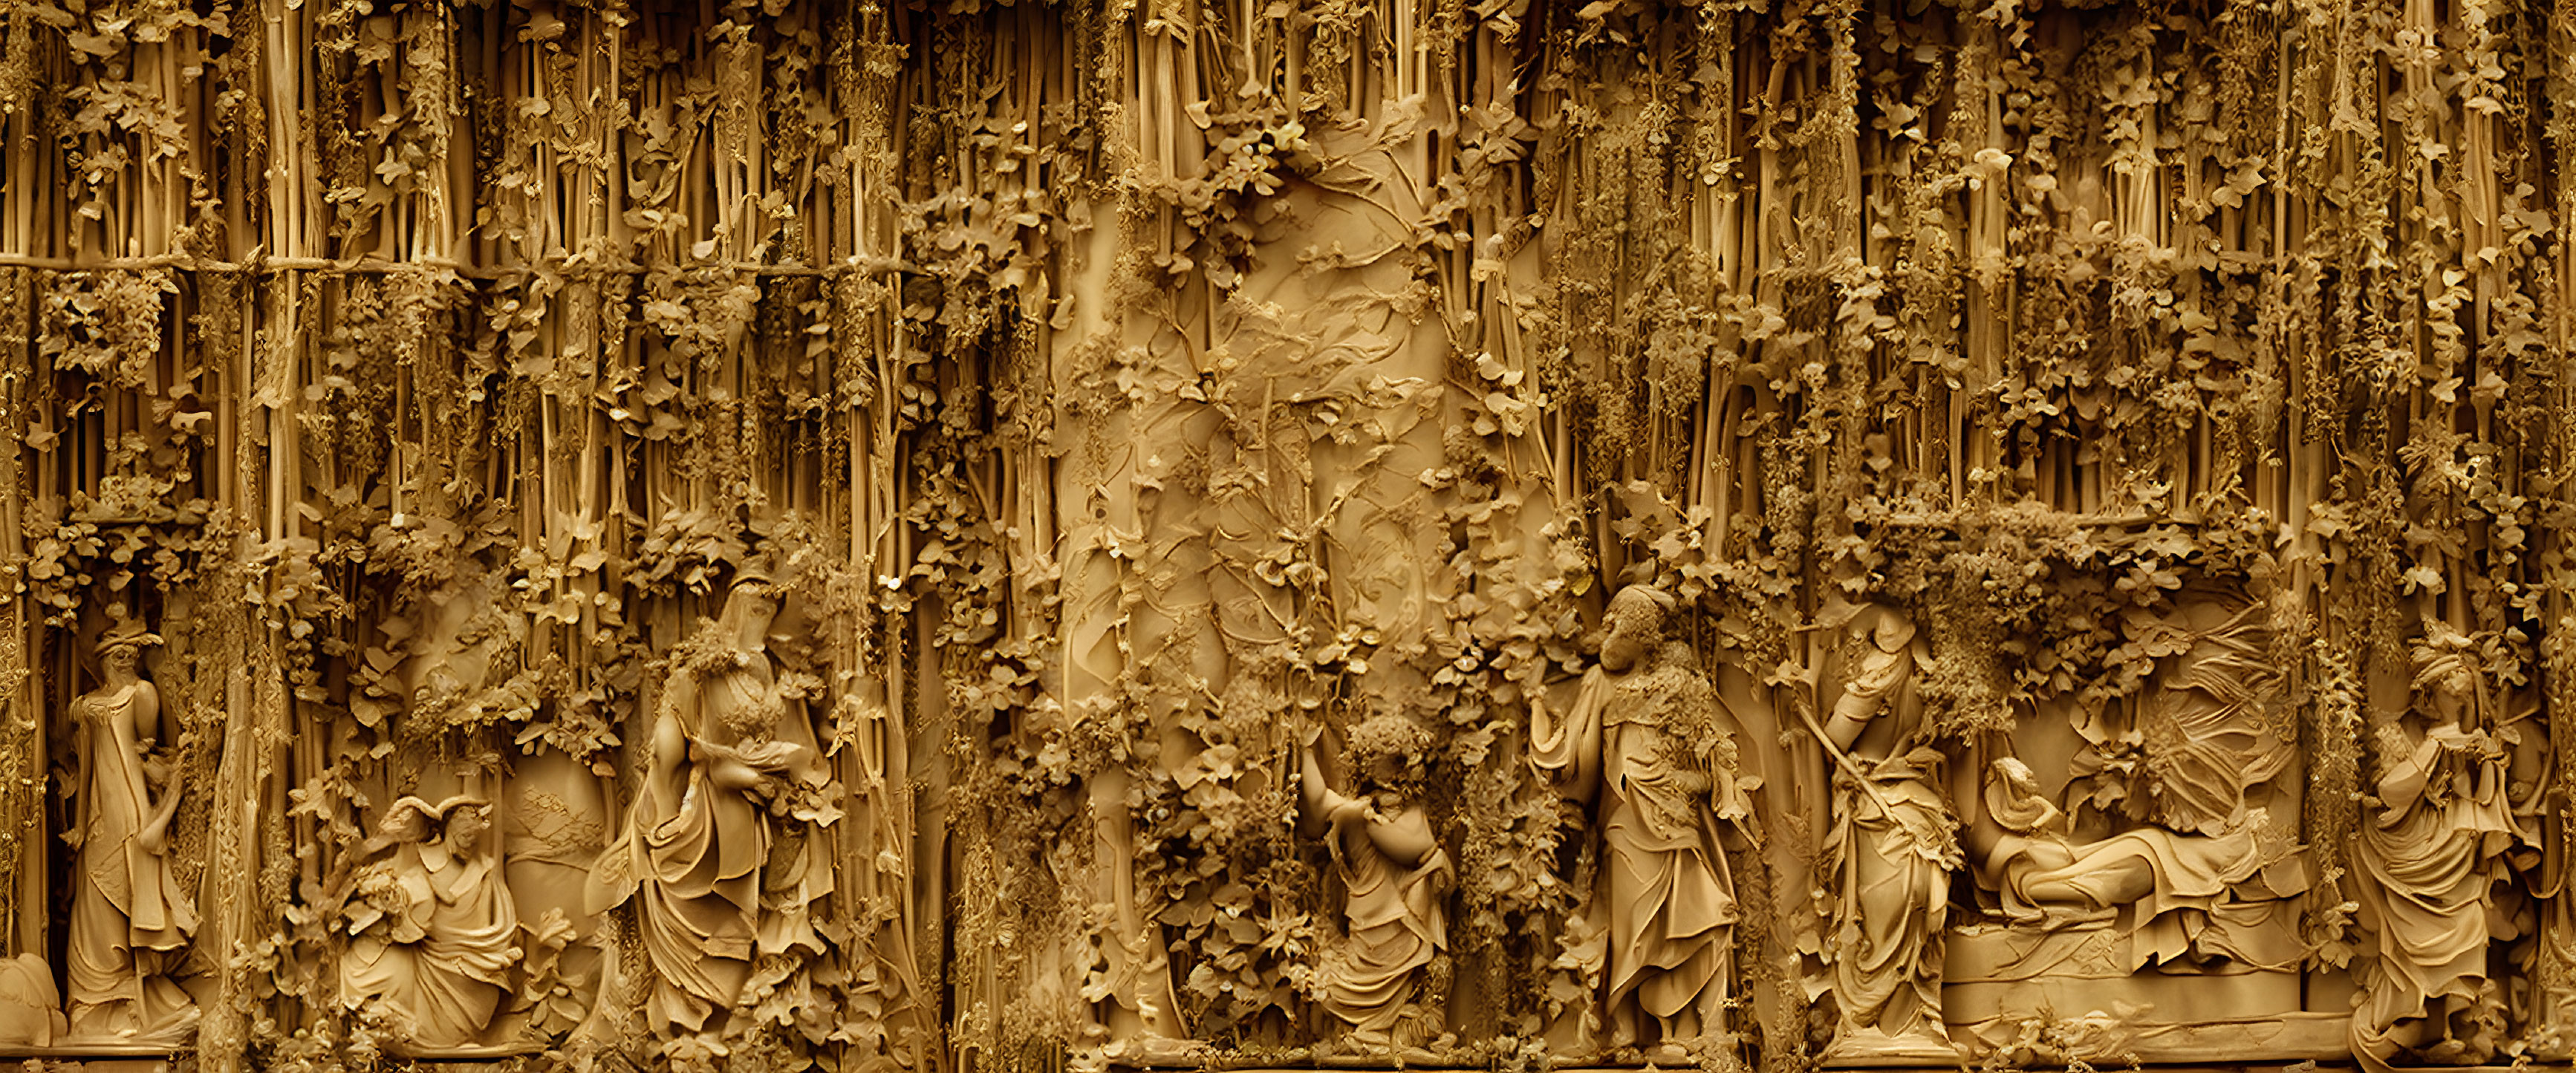 Intricate Nature-Inspired Golden Relief Panel